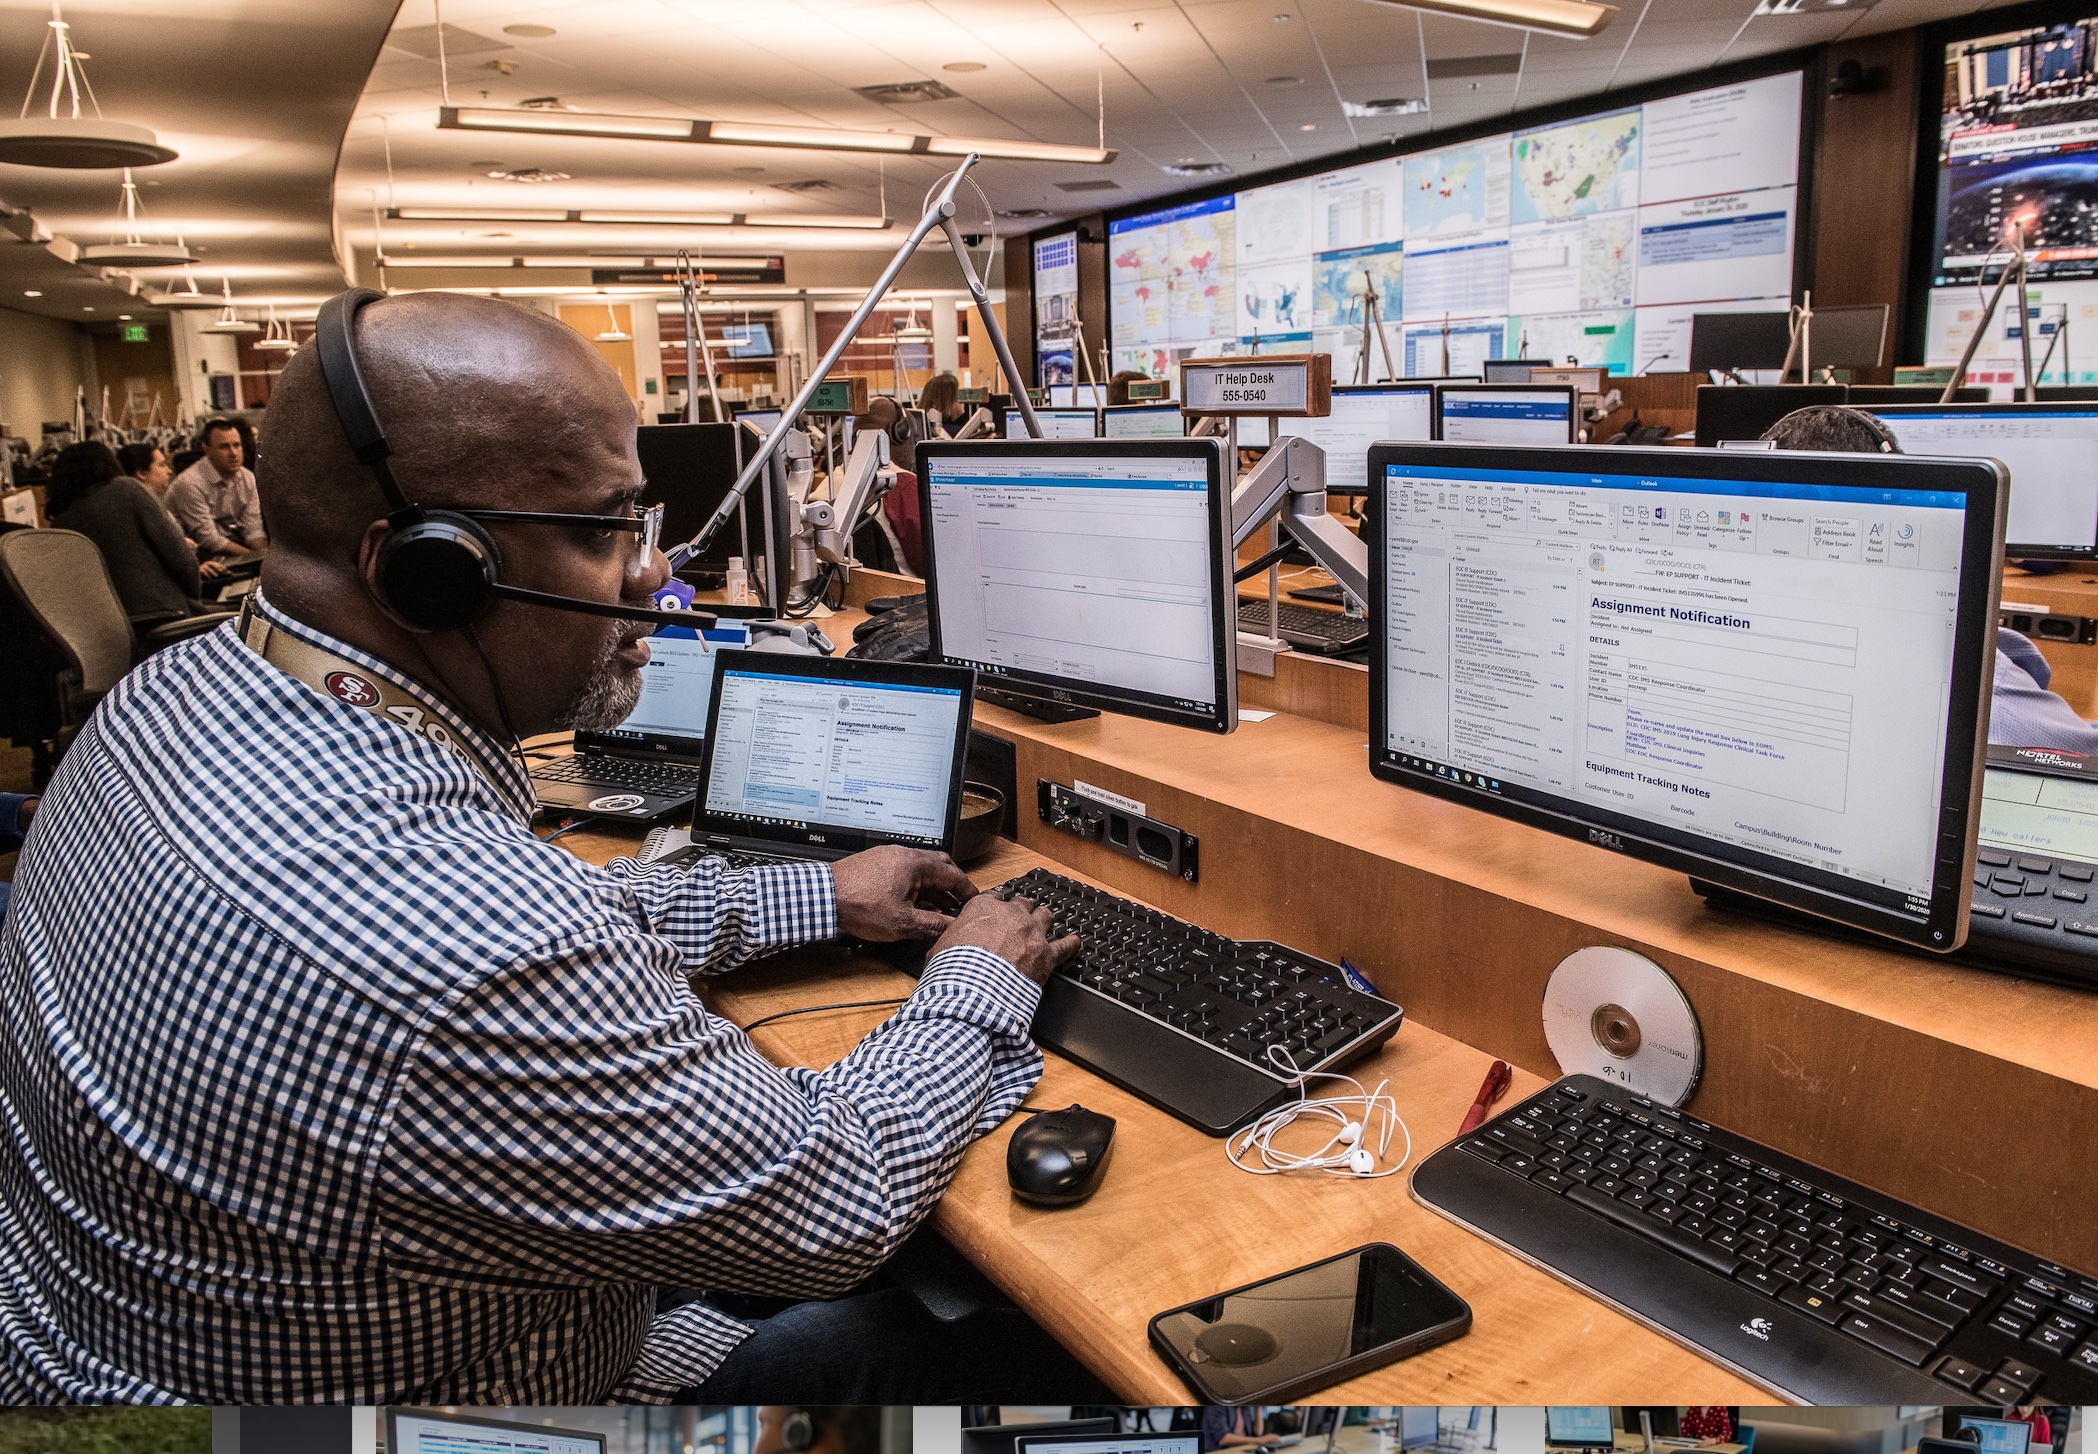 CDC activates its Emergency Operations Center (EOC) to assist public health partners; image by CDC, via Unsplash.com.